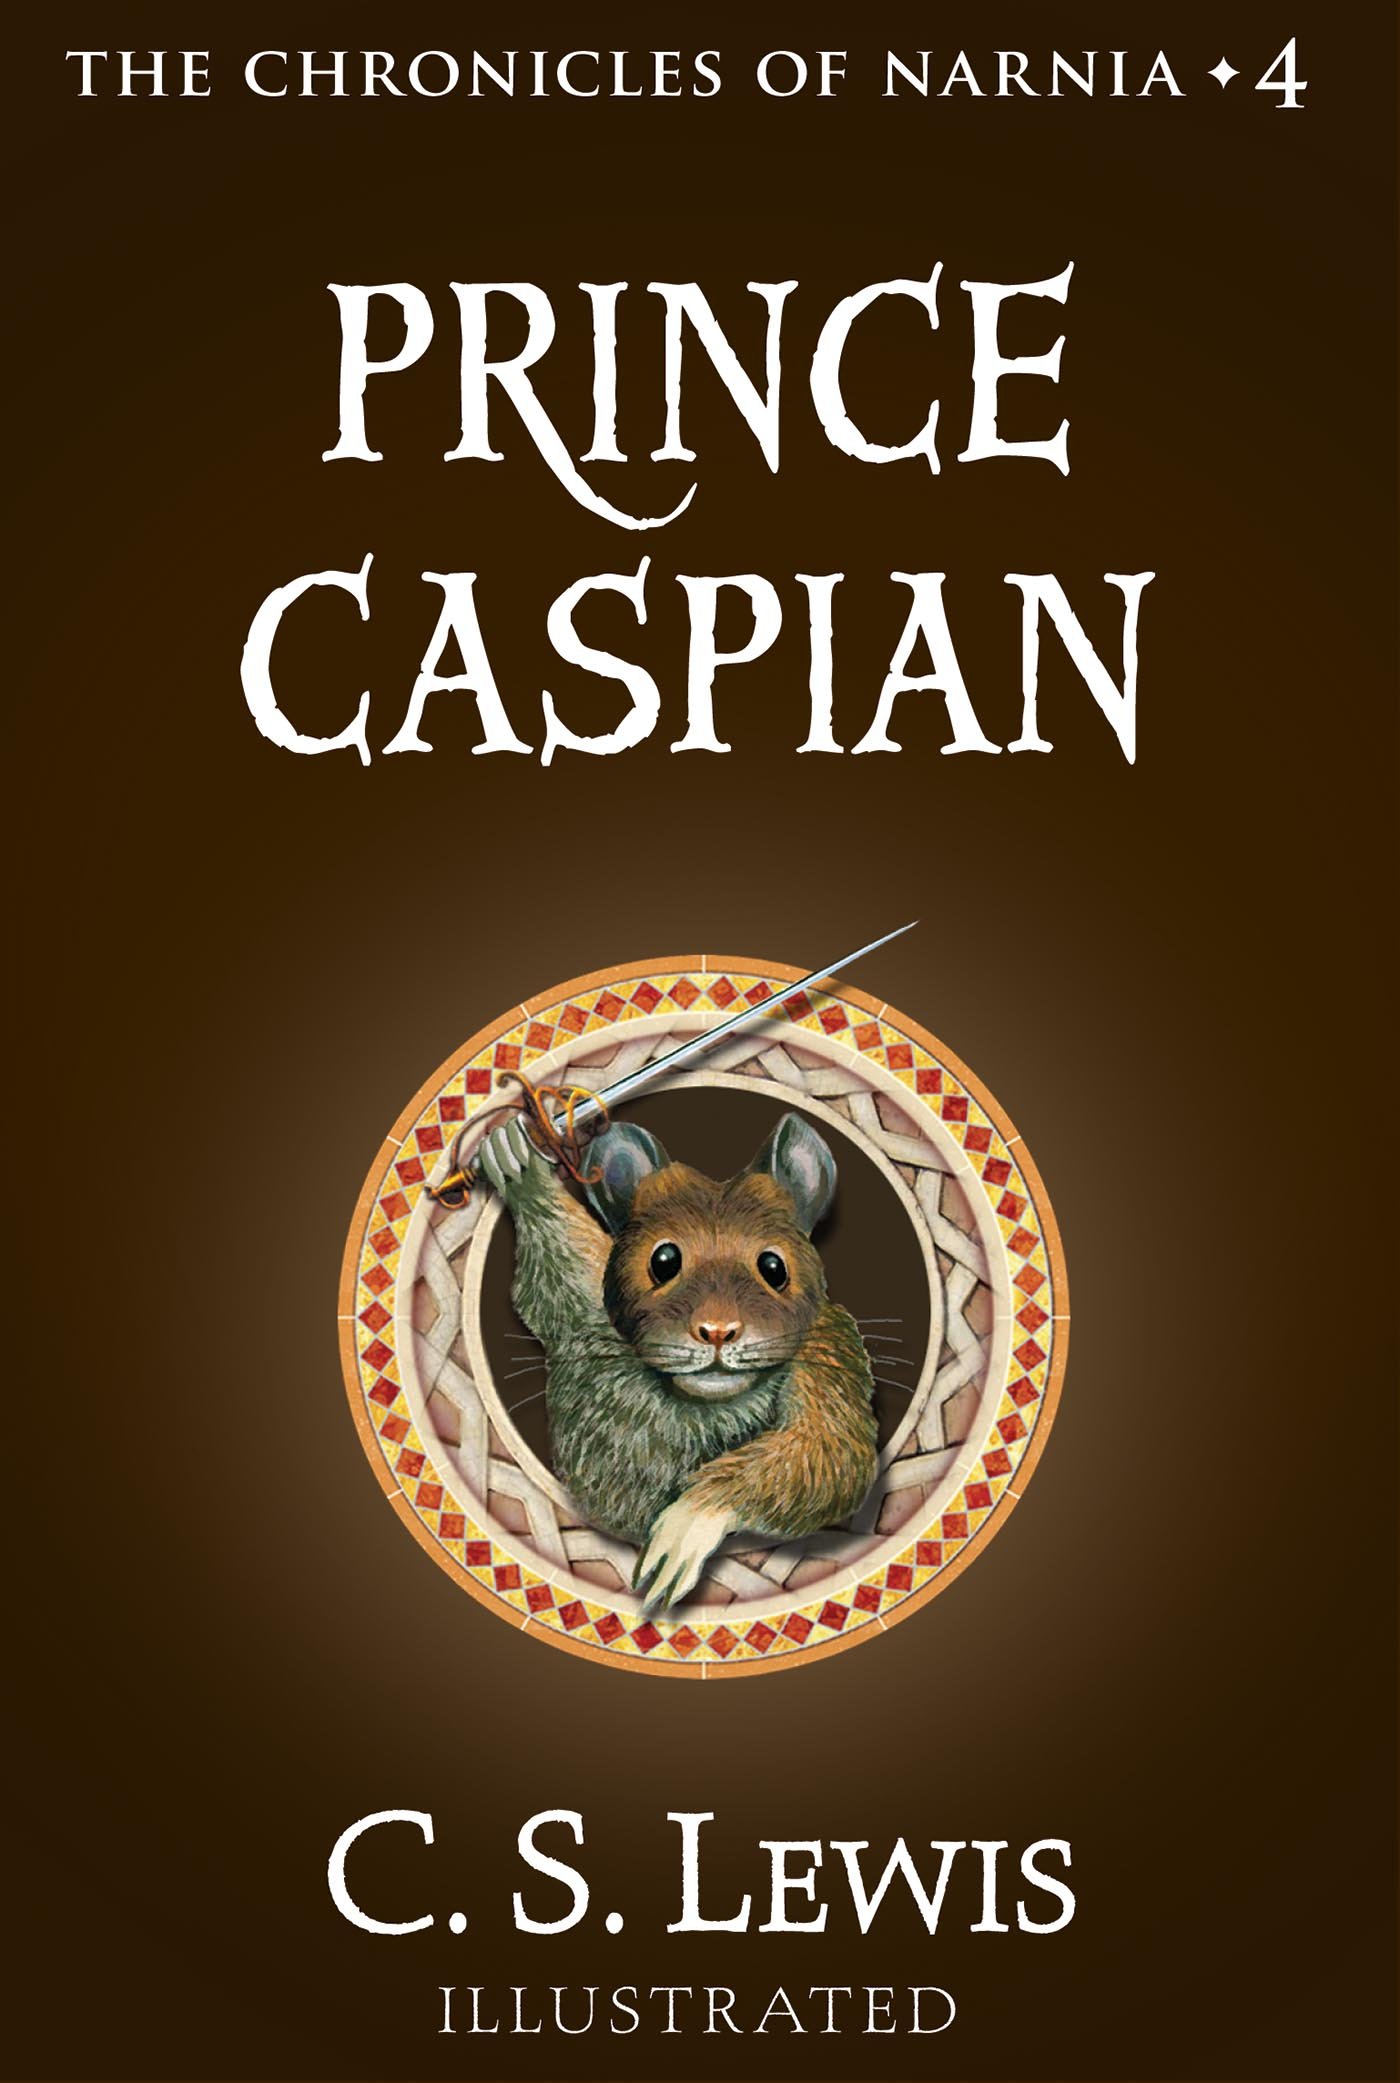 Prince Caspian: The Return to Narnia (Chronicles of Narnia Book 4)